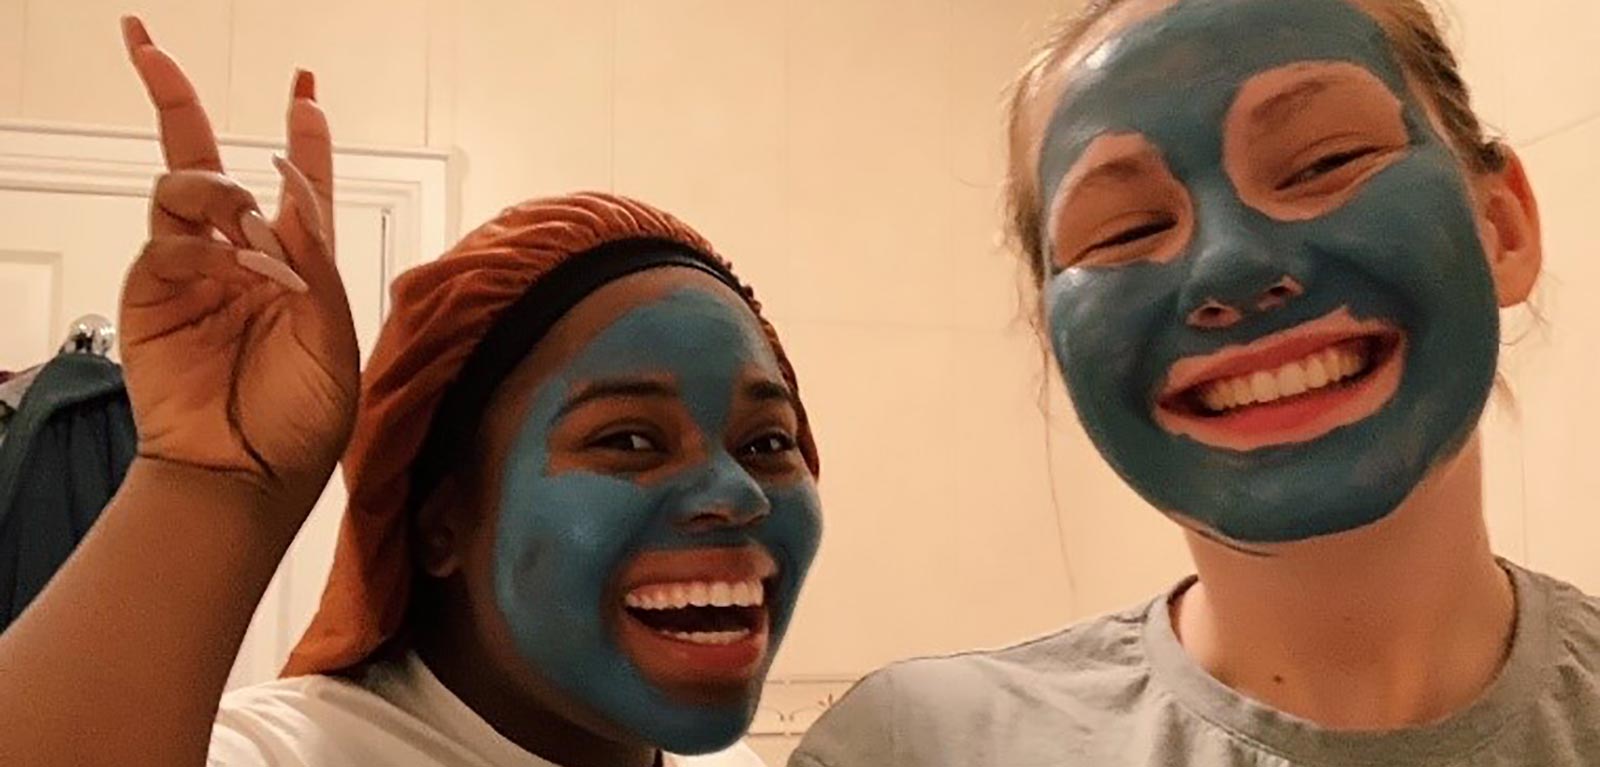 Kathryn and her friend in face masks